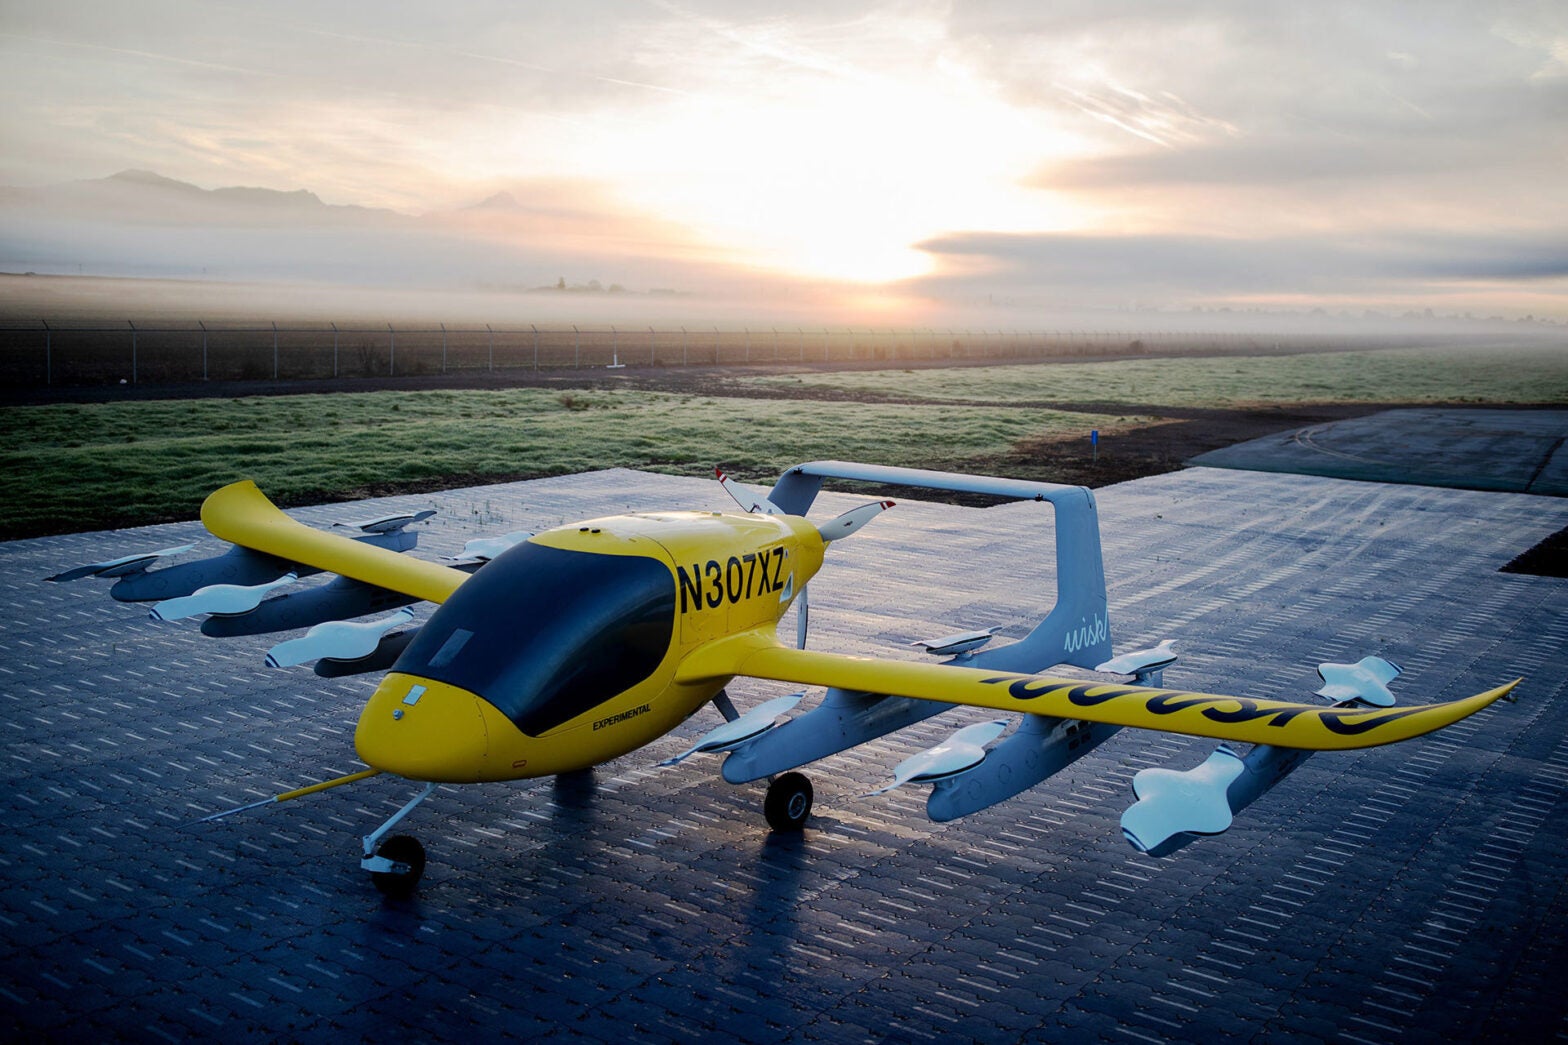 New Zealand and Wisk Sign MOU for Autonomous Air Taxi Trial